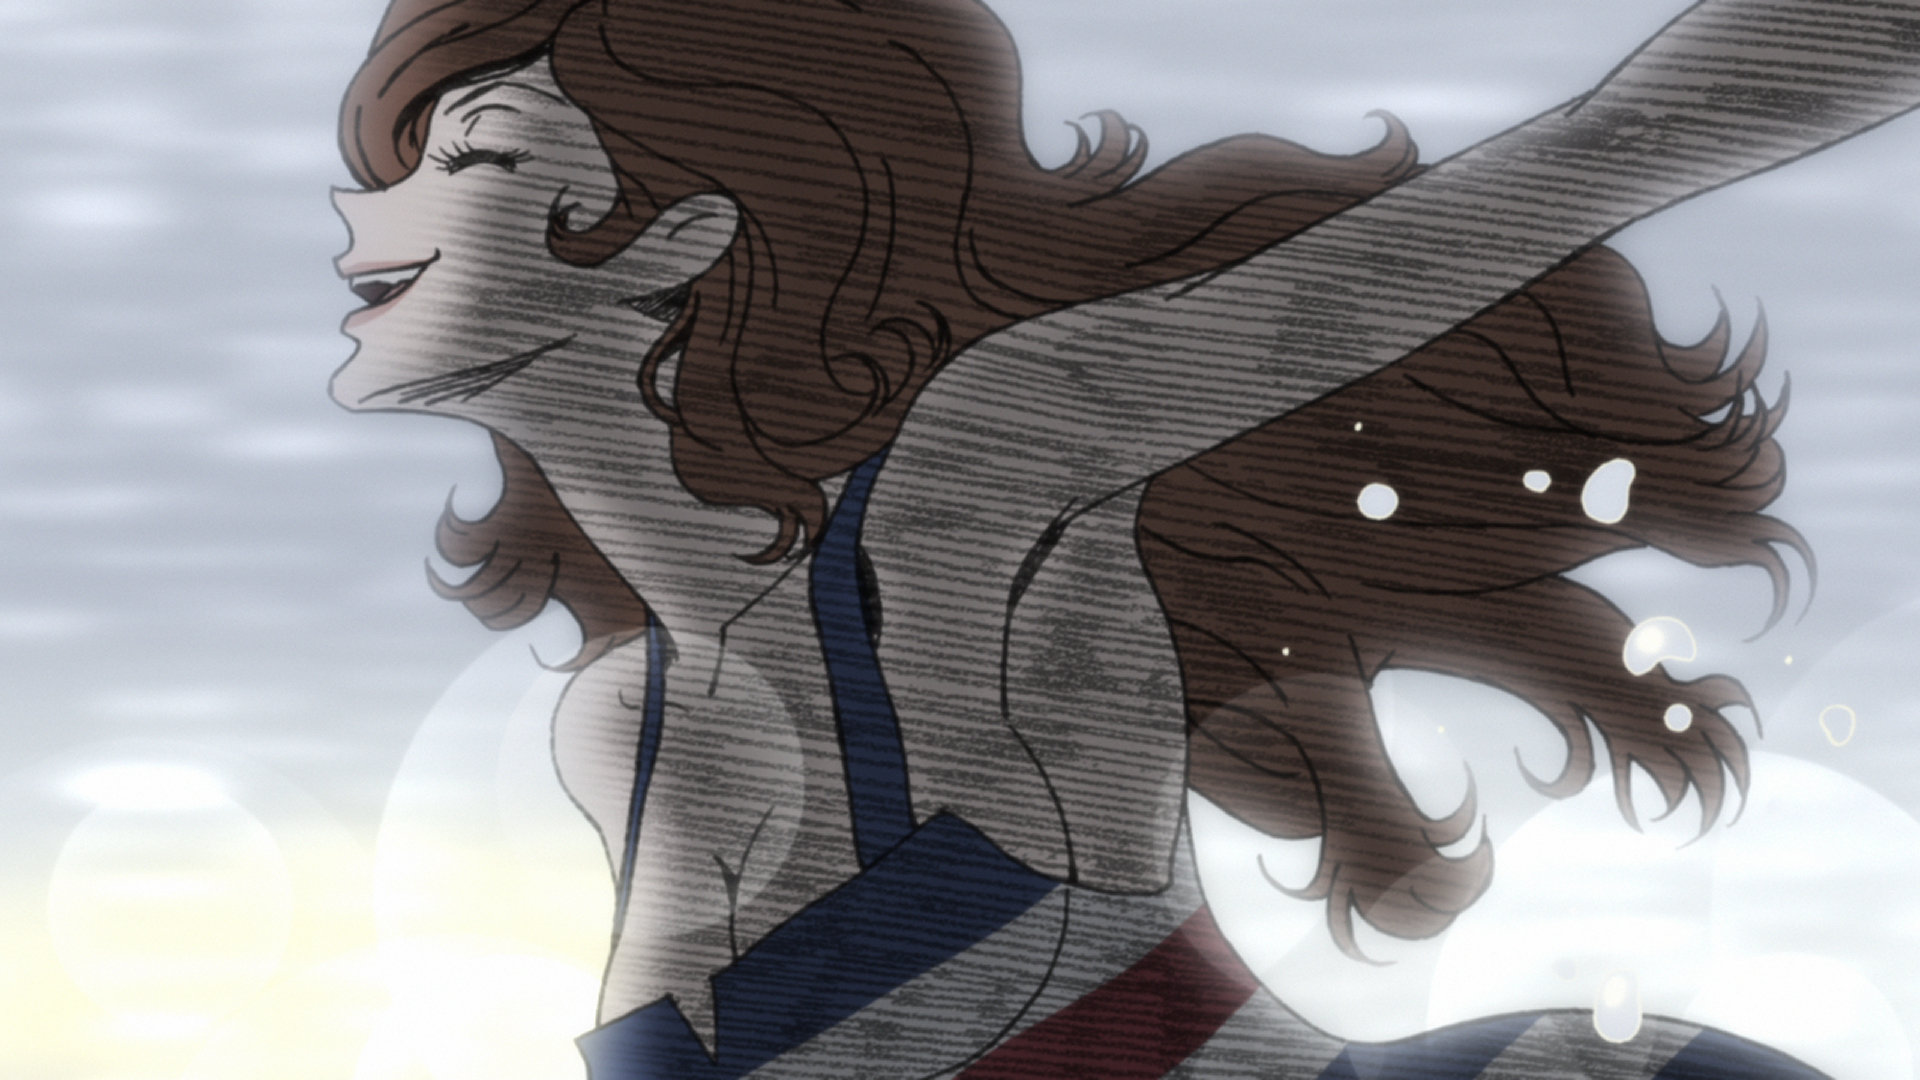 Image For Lupin The 3rd - Fujiko Mine And Lupin , HD Wallpaper & Backgrounds